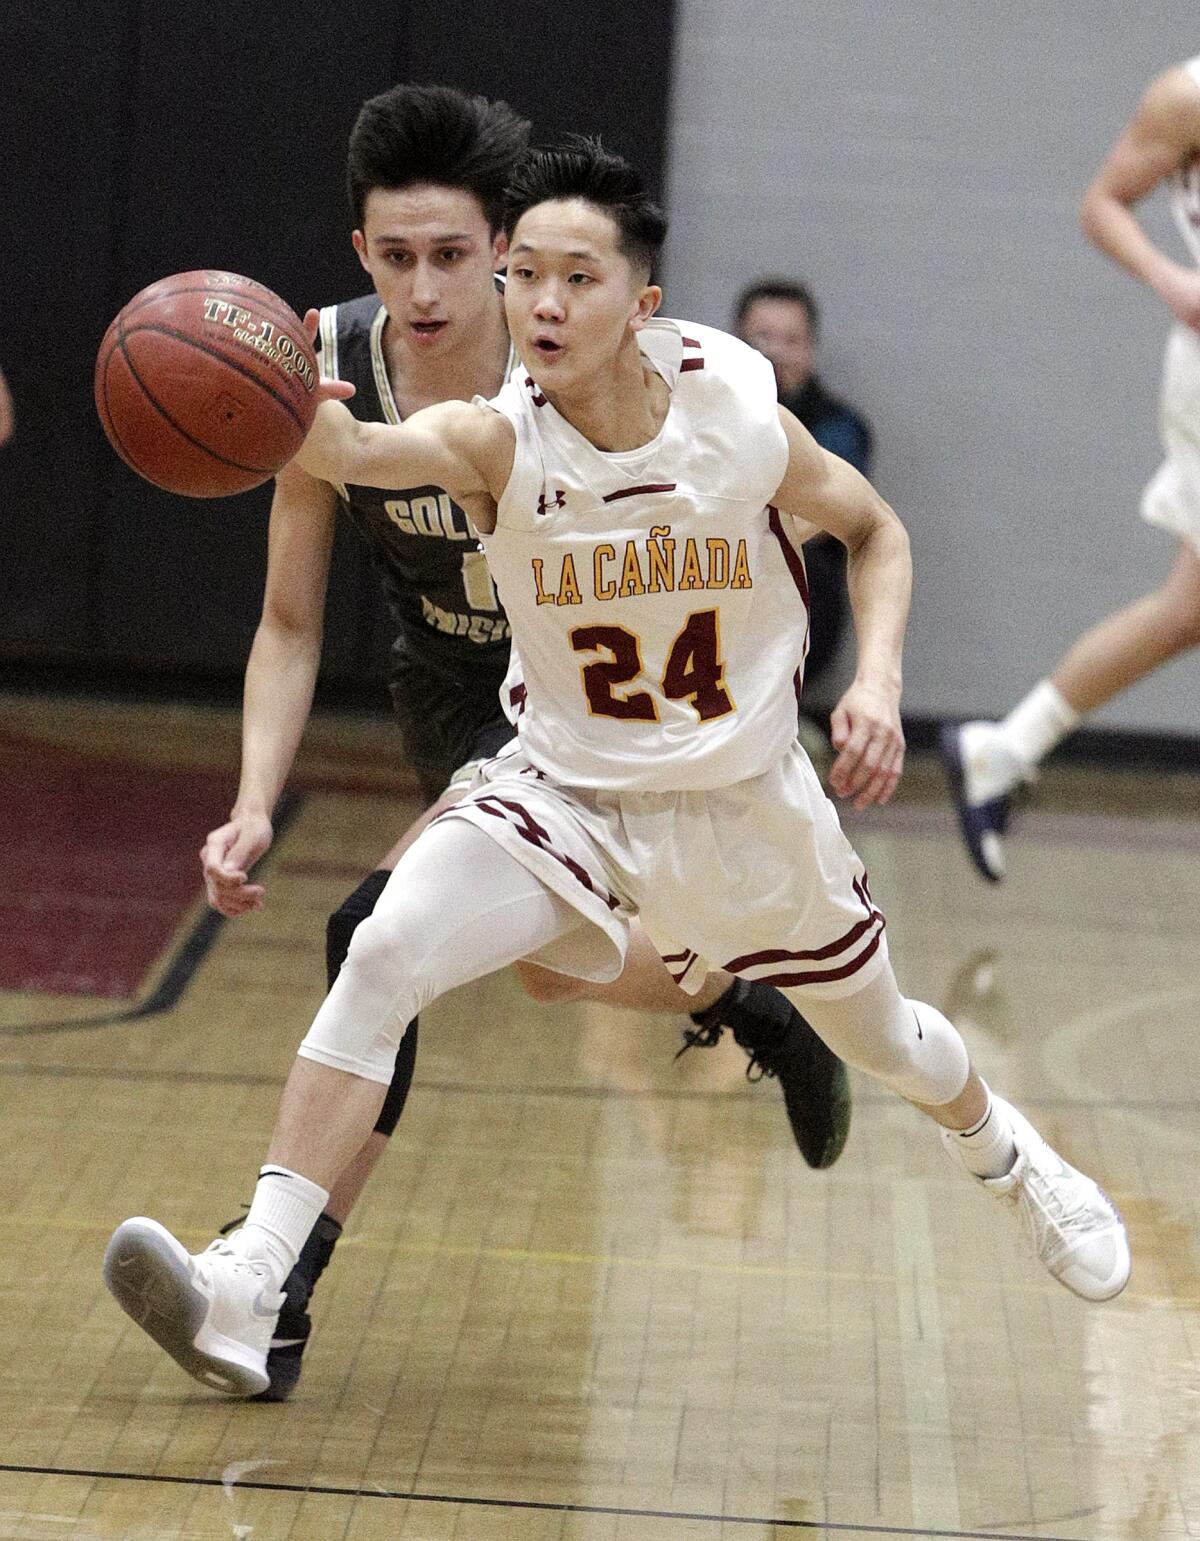 La Canada's Darren Pung recovers the ball after it was knocked away from him by St. Francis' Frederick Harper in CIF Southern Section Division II-A first-round boys' basketball playoff at La Canada High School on Wednesday, February 12, 2020.